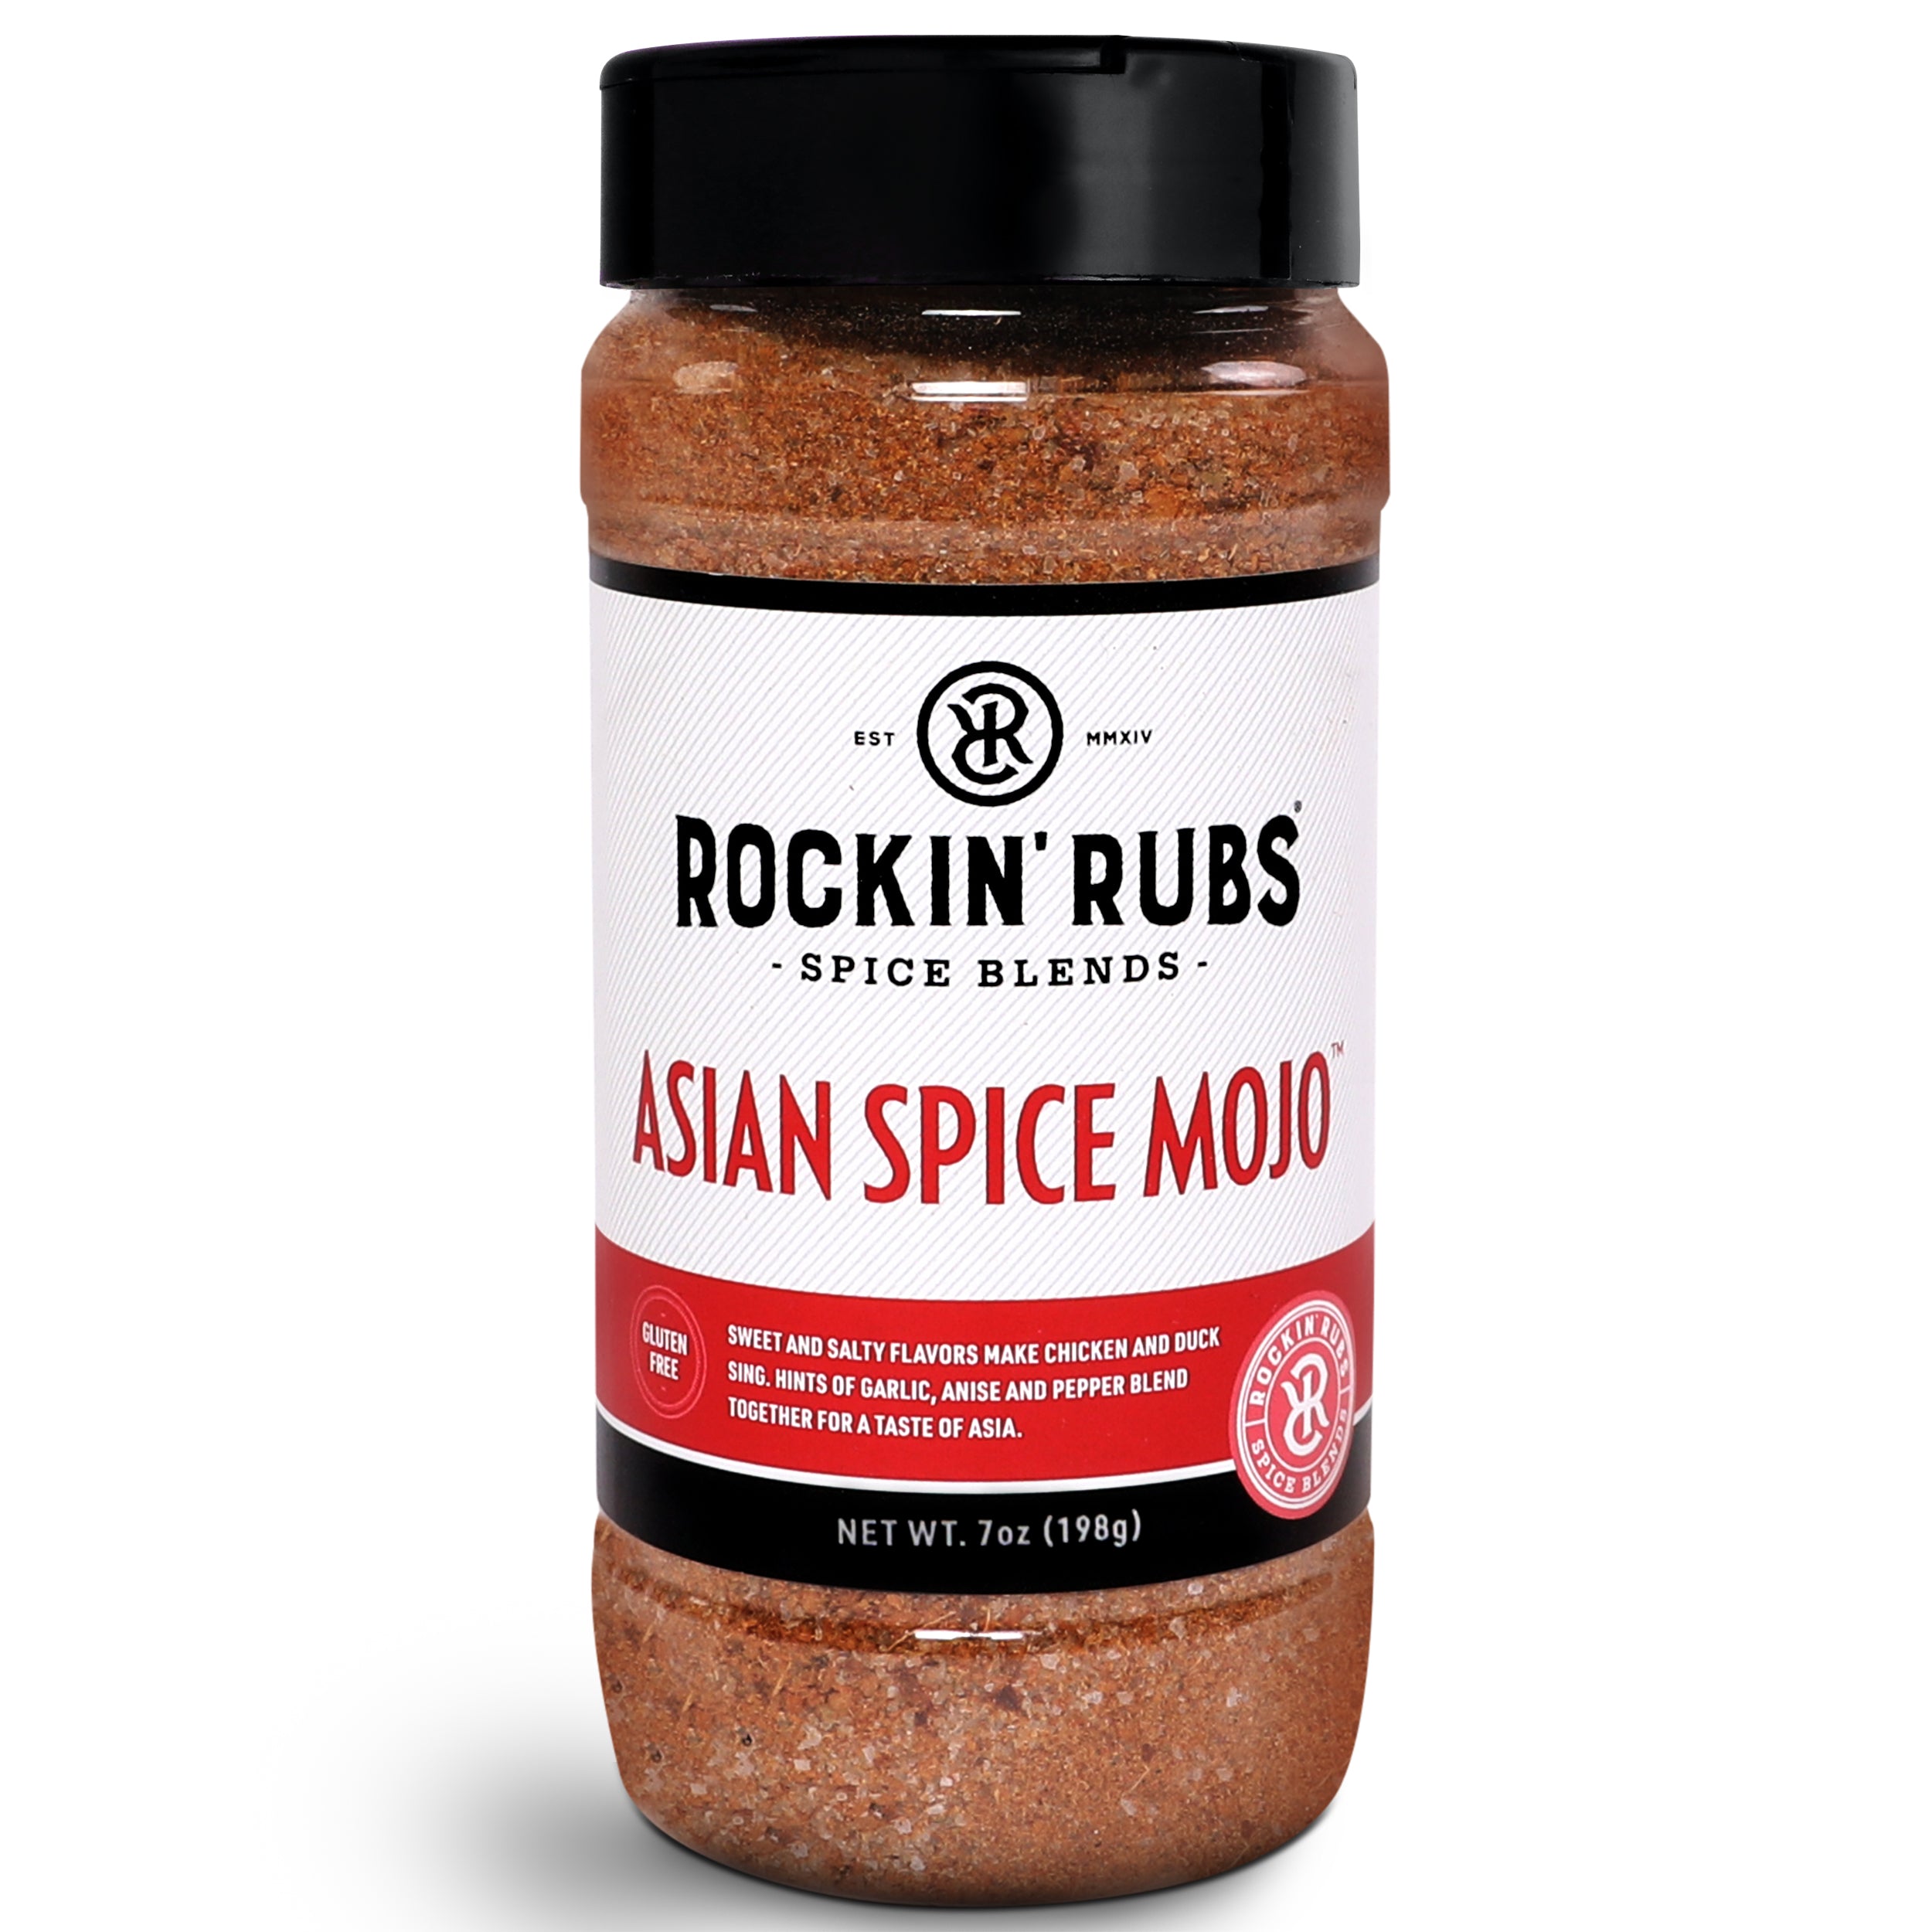 Chinese Five-Spice Power is the Spice Blend We Add to Dry Rubs and